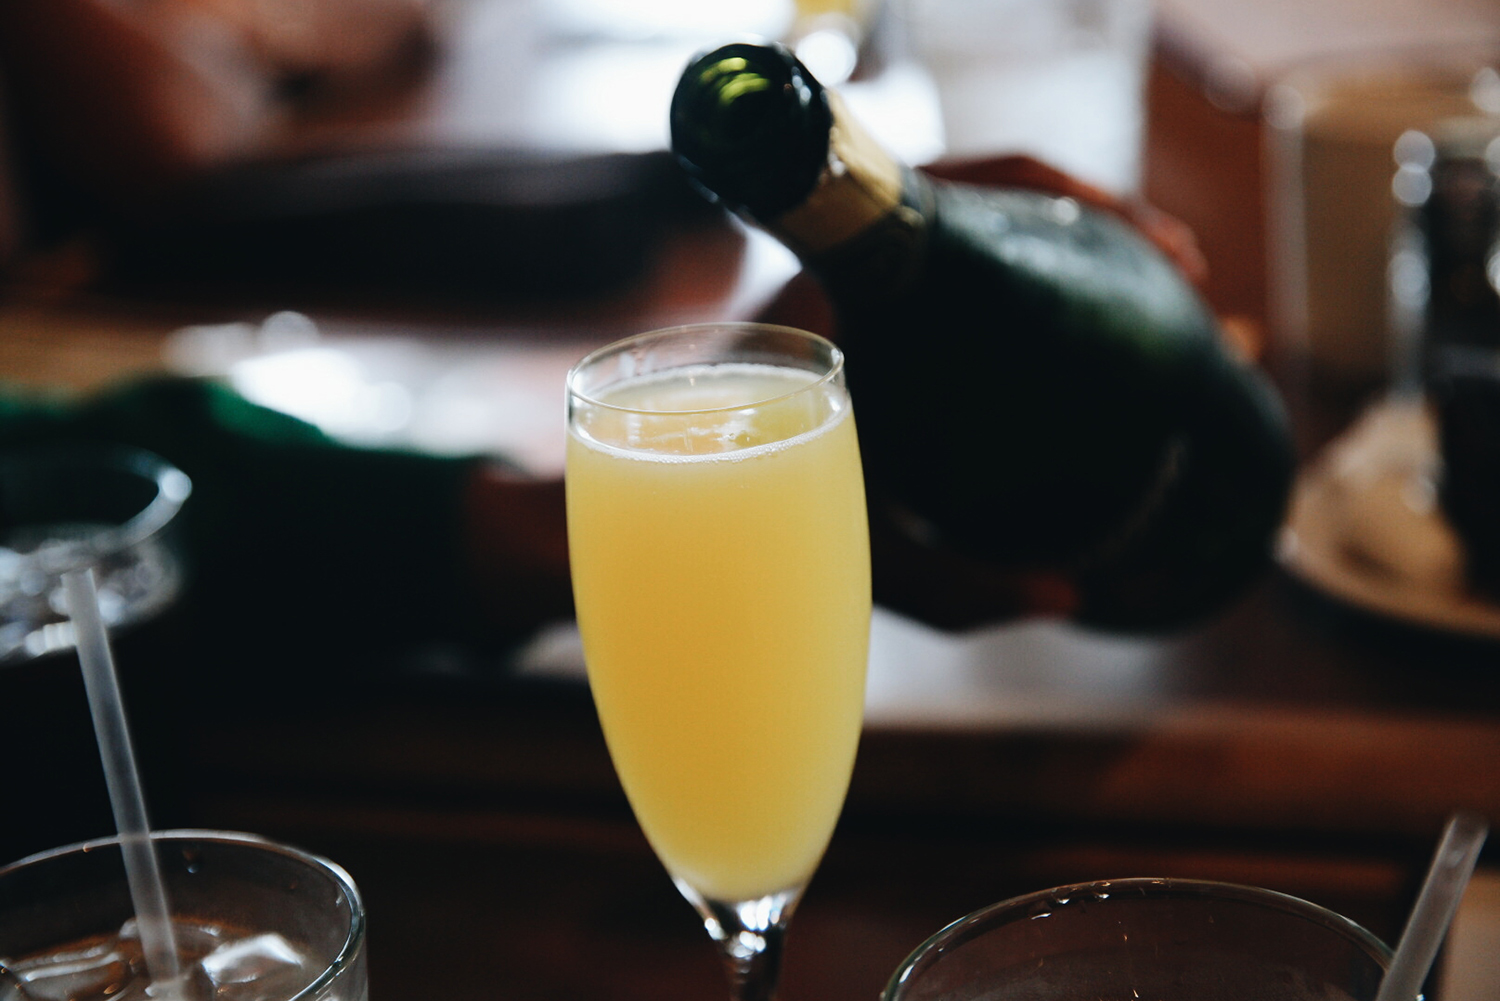 We are making Mimosa Mondays a Must! Check out this Mimosa Tower